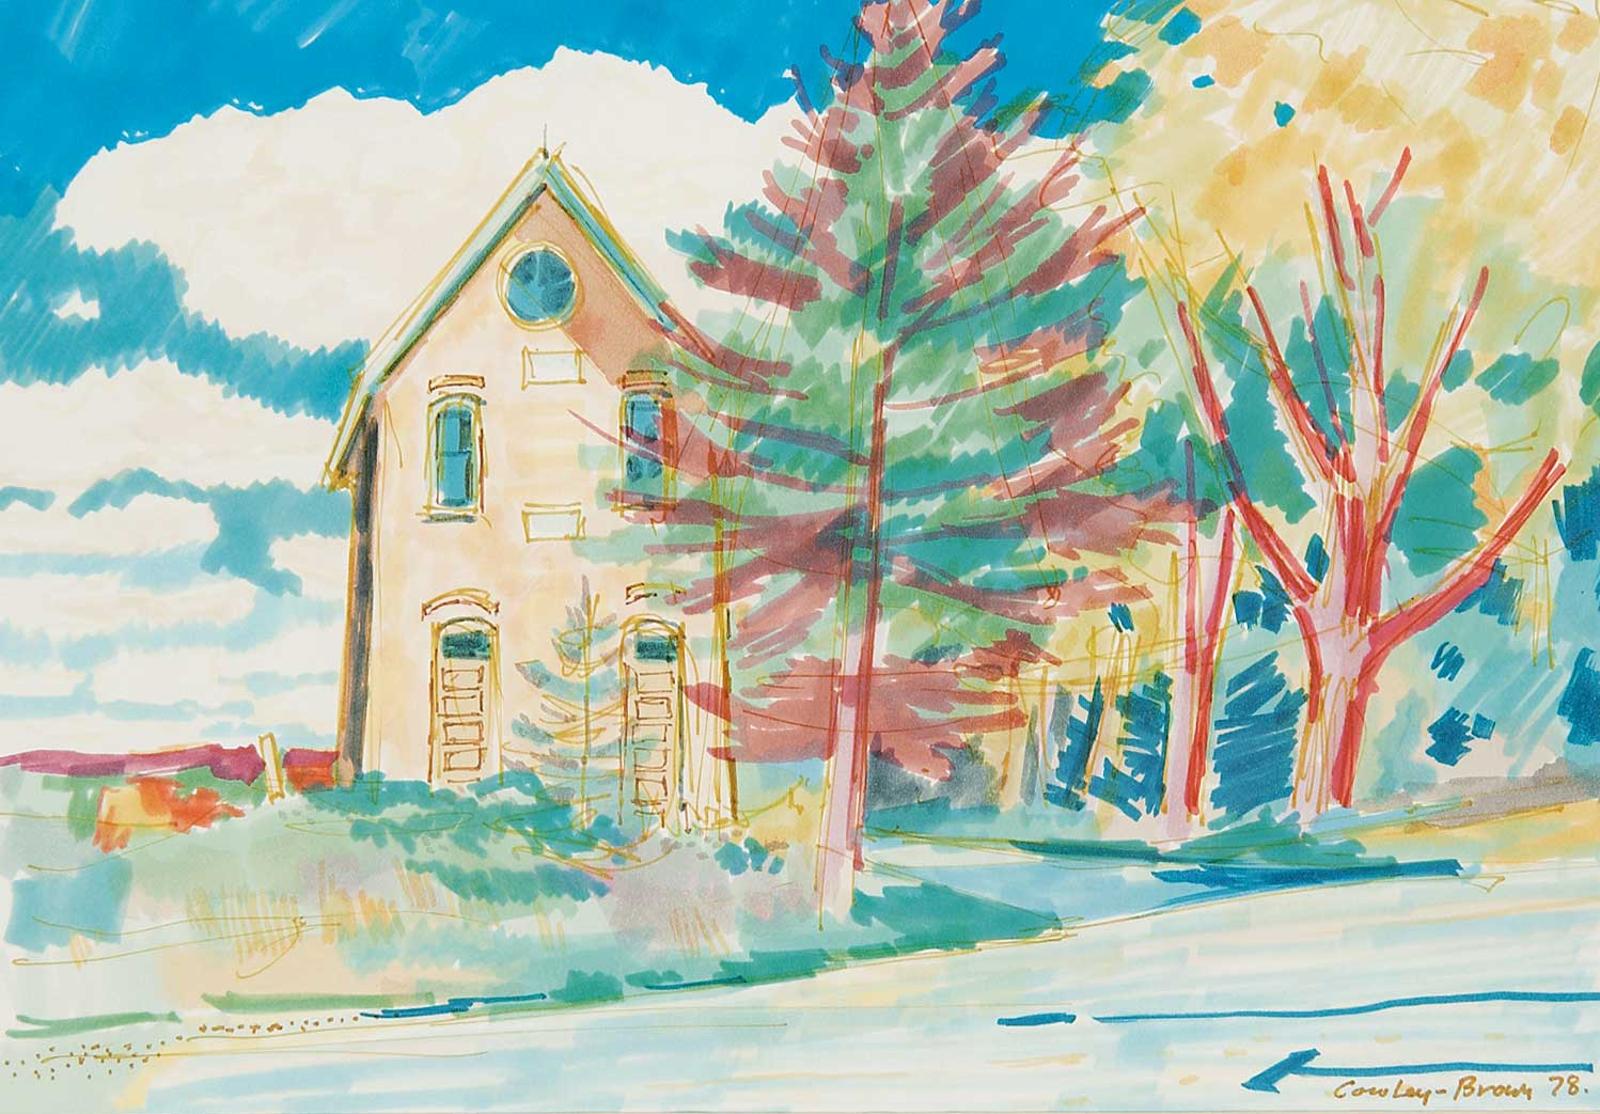 Patrick George Cowley-Brown (1918-2007) - Untitled - House and Trees